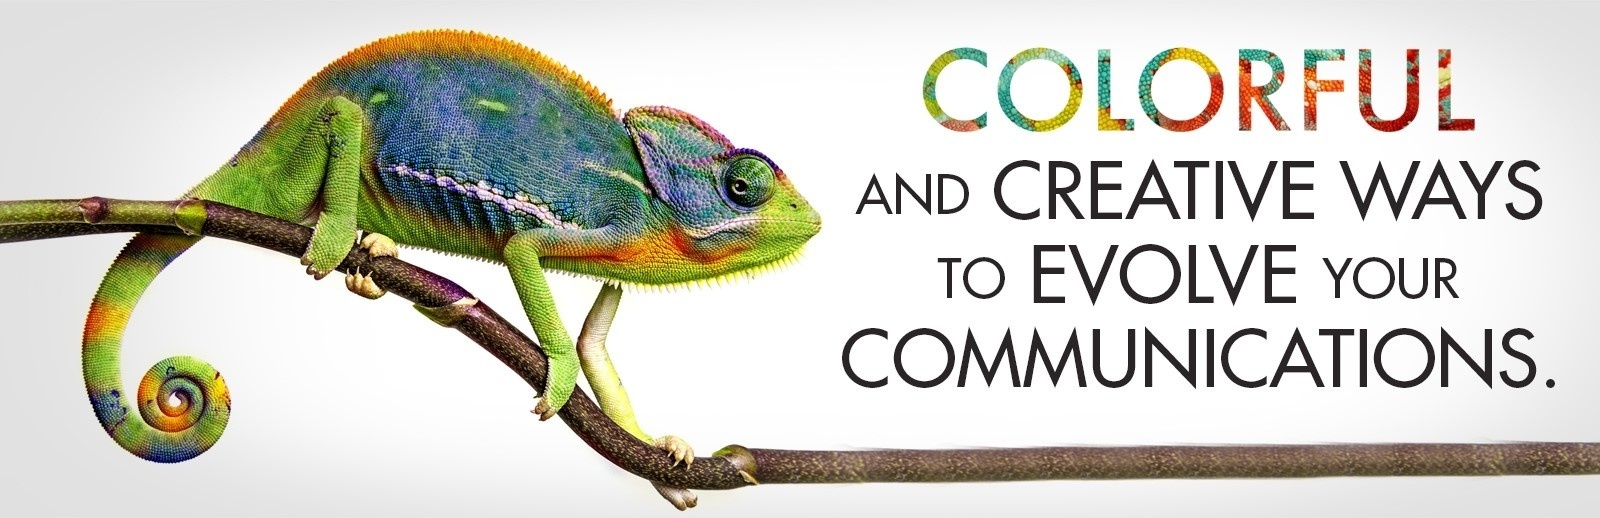 Colorful and Creative Ways to Evolve Your Communications